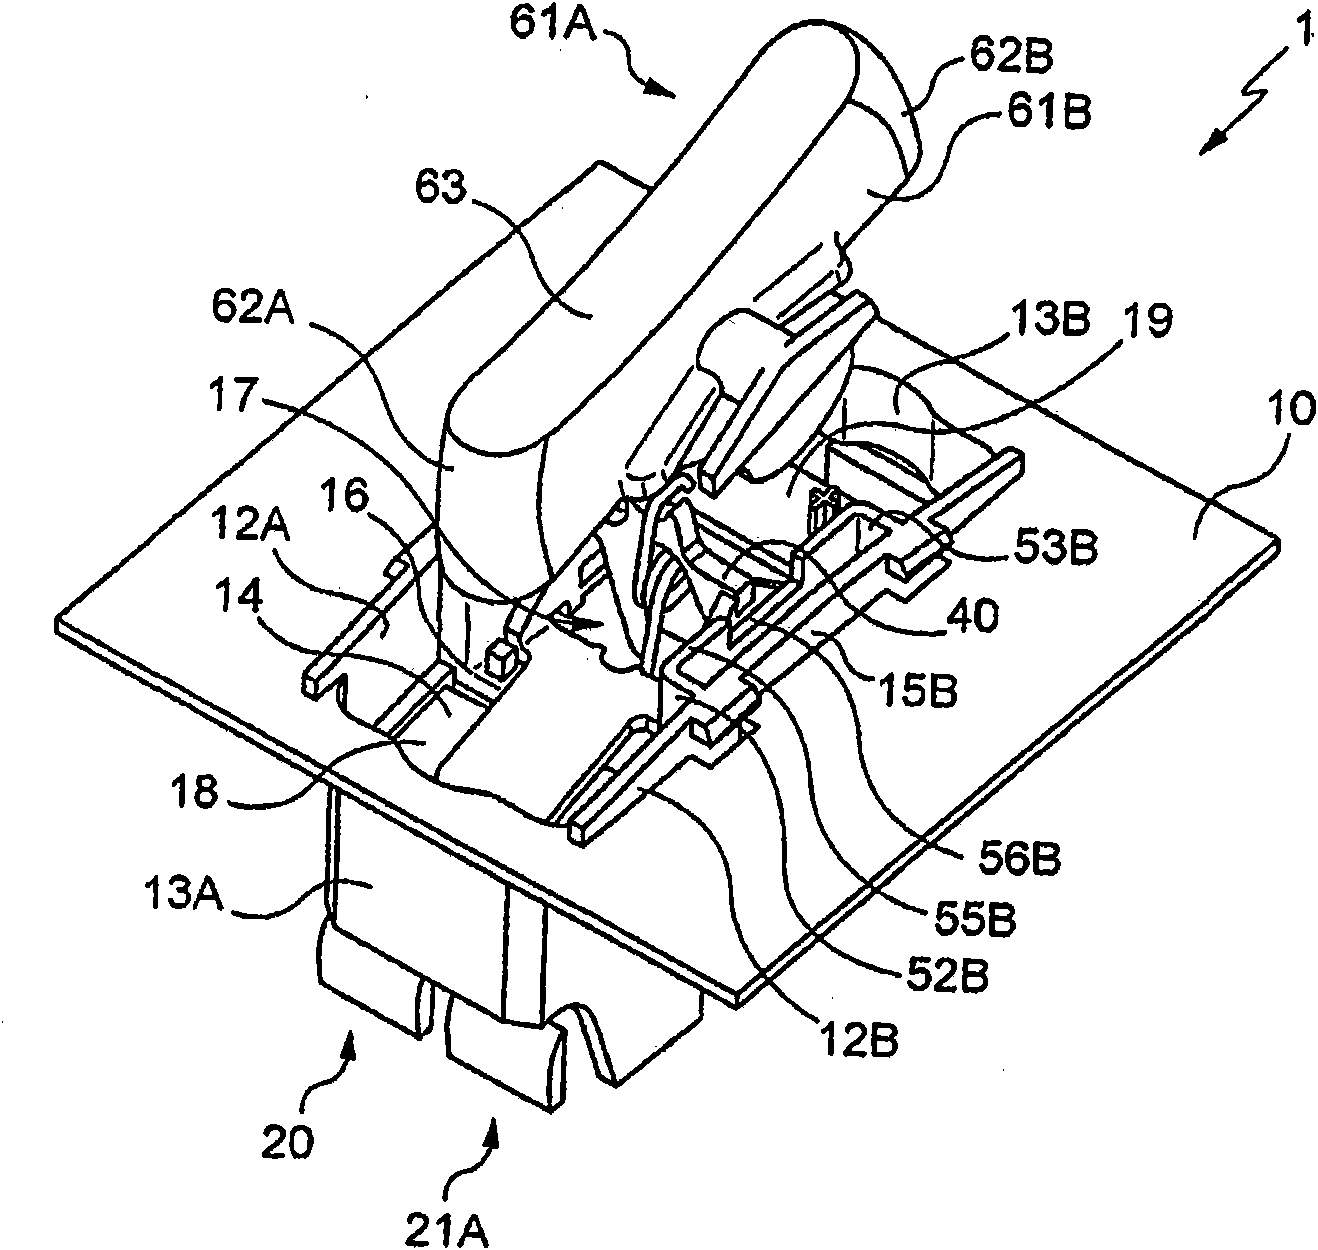 Electrical apparatus such as a switch